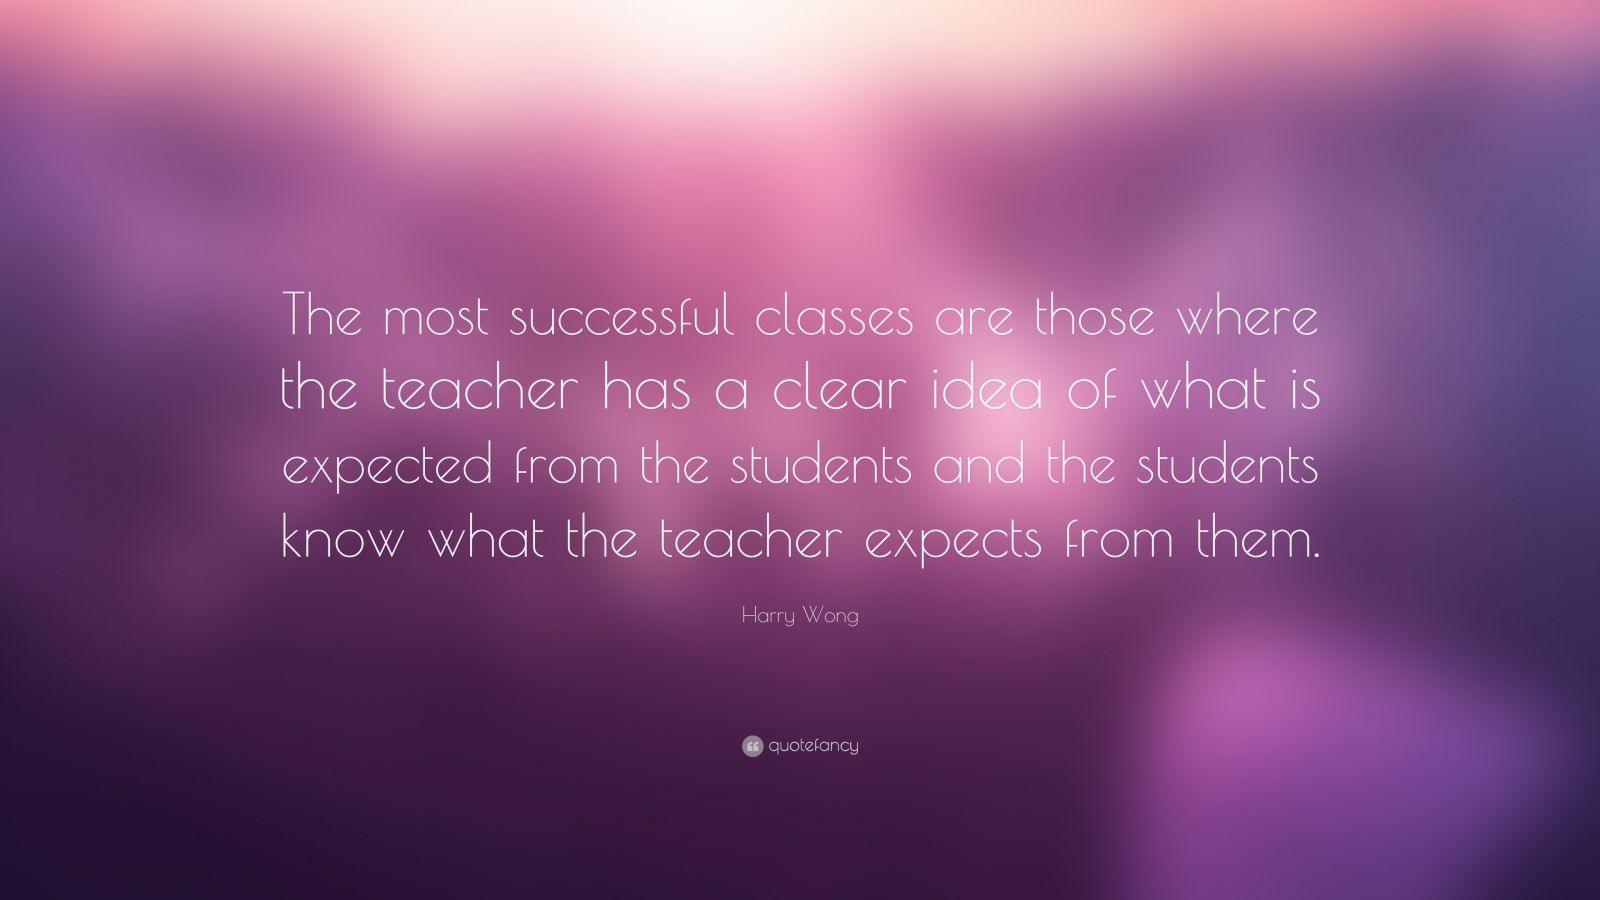 Harry Wong Quote: "The most successful classes are those where the teacher has a clear idea of ...